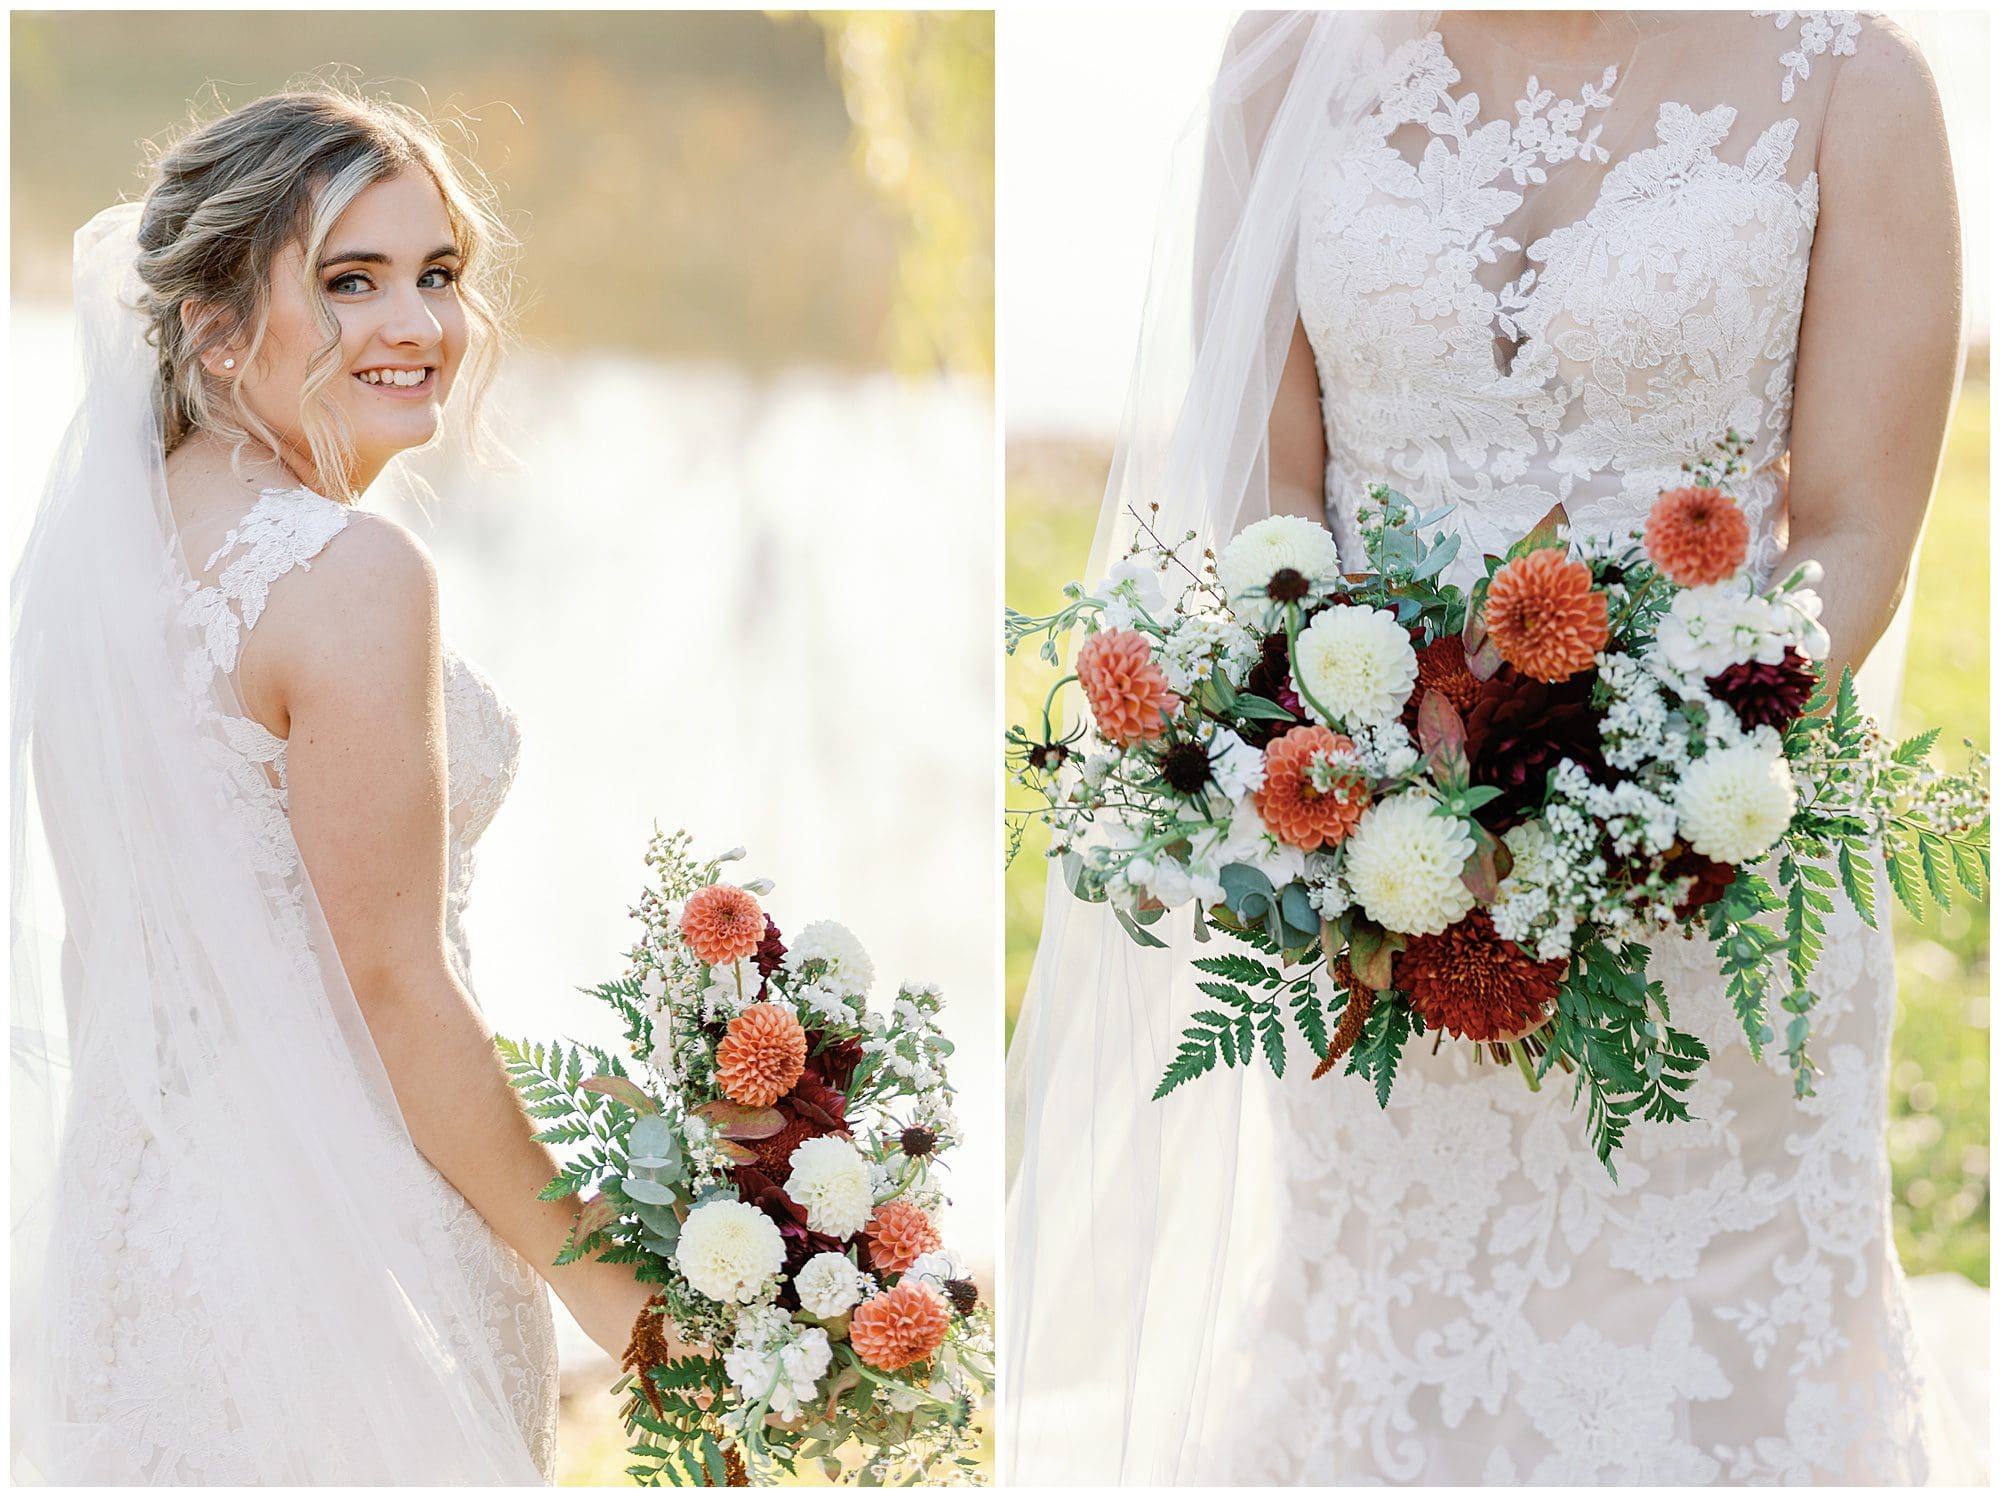 Bride in a lace wedding gown smiling over her shoulder, holding a bouquet of red, orange, and white flowers.